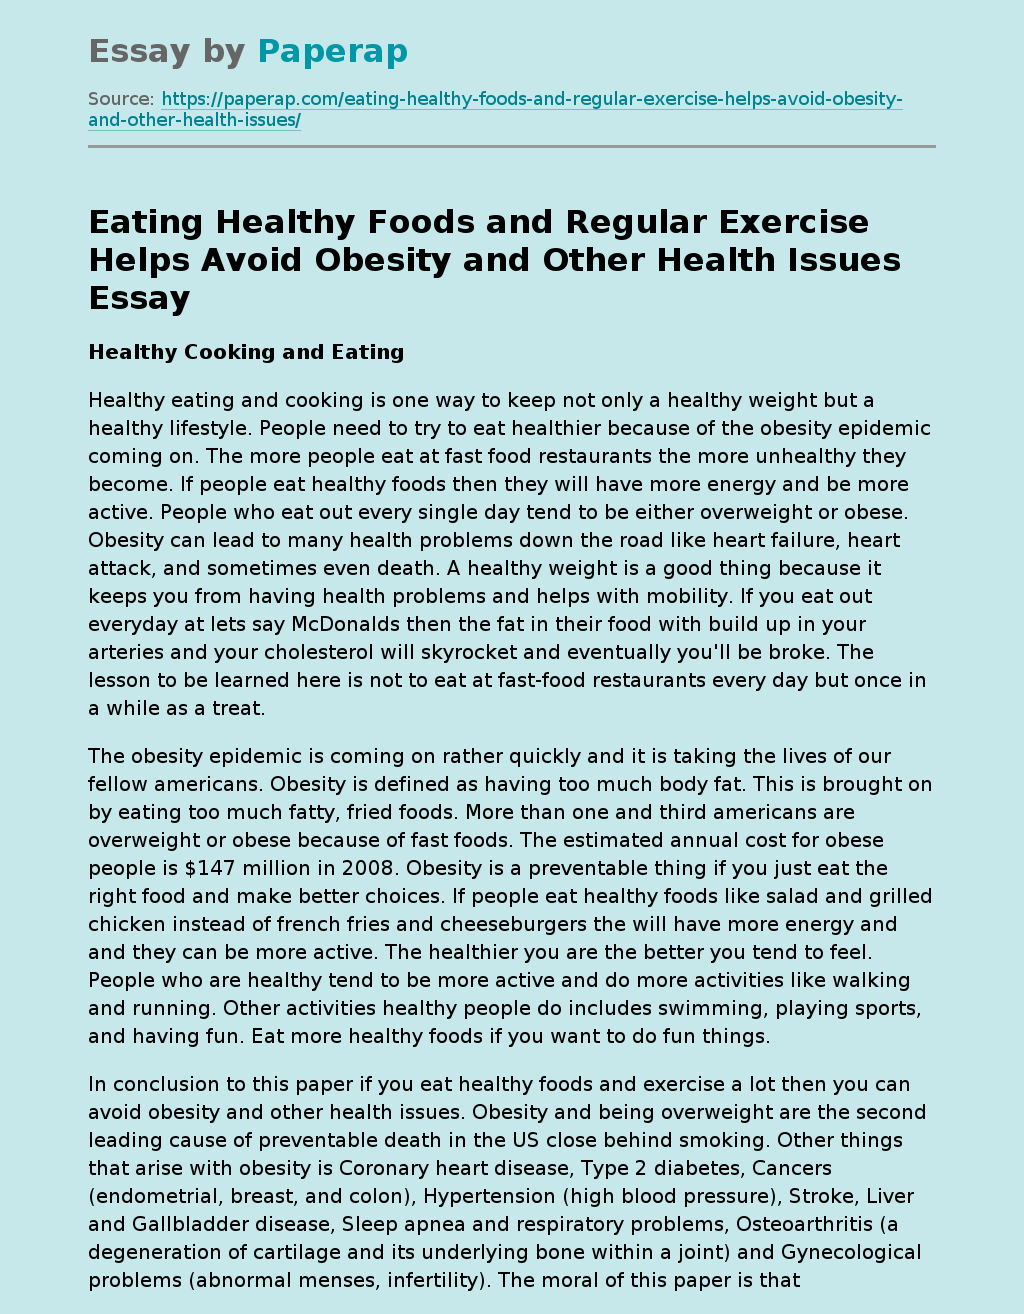 Eating Healthy Foods and Regular Exercise Helps Avoid Obesity and Other Health Issues